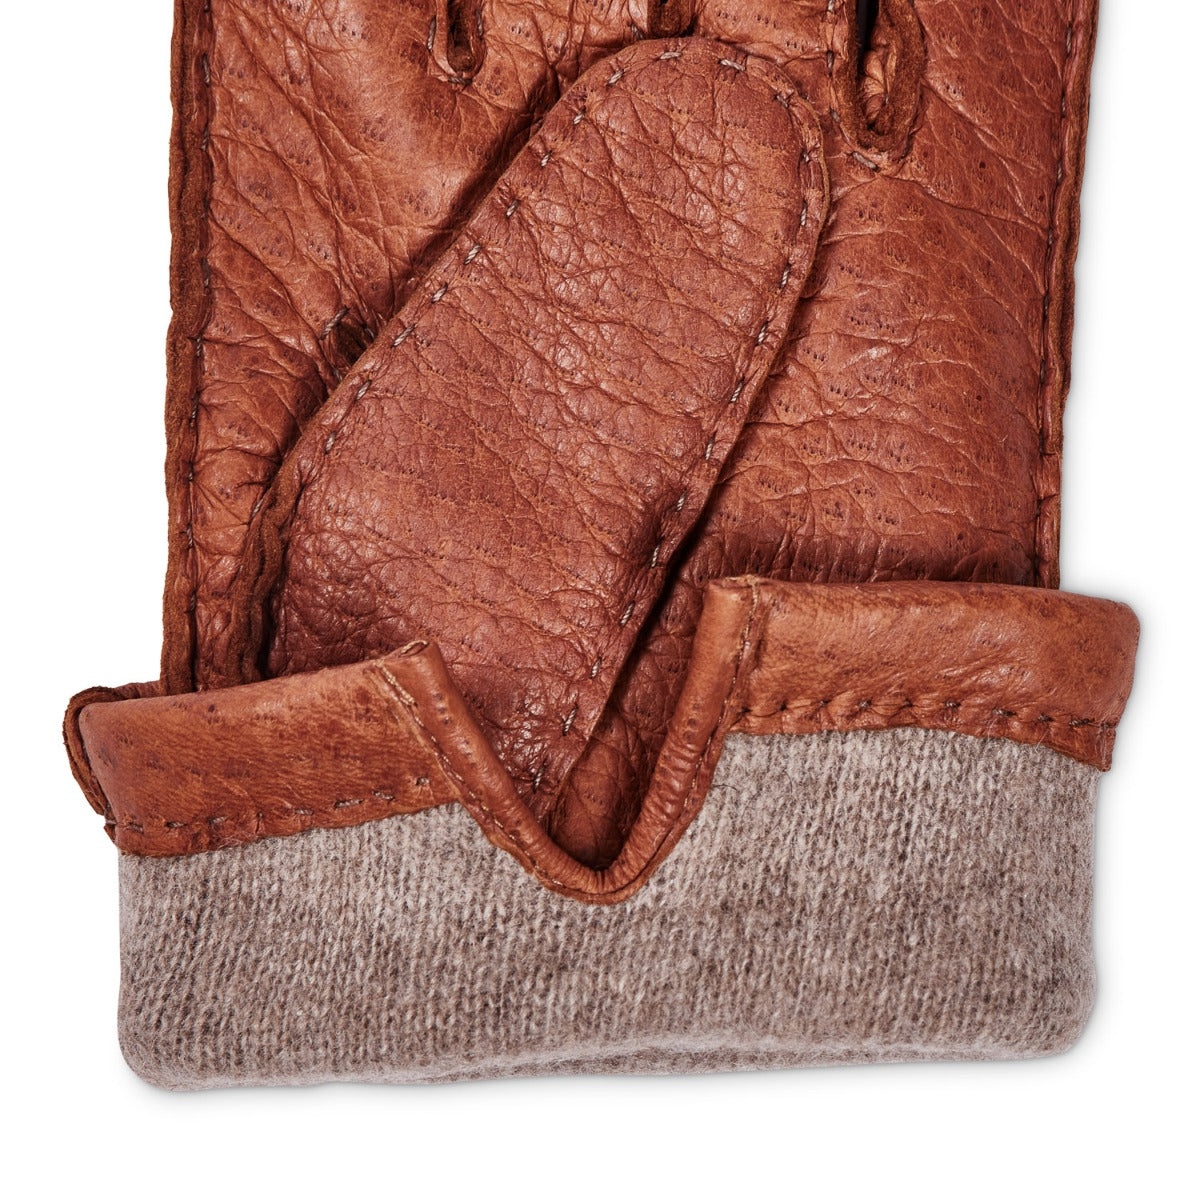 A pair of Sovereign Grade Medium Brown Peccary Leather Gloves, Cashmere Lined by KirbyAllison.com on a white background.